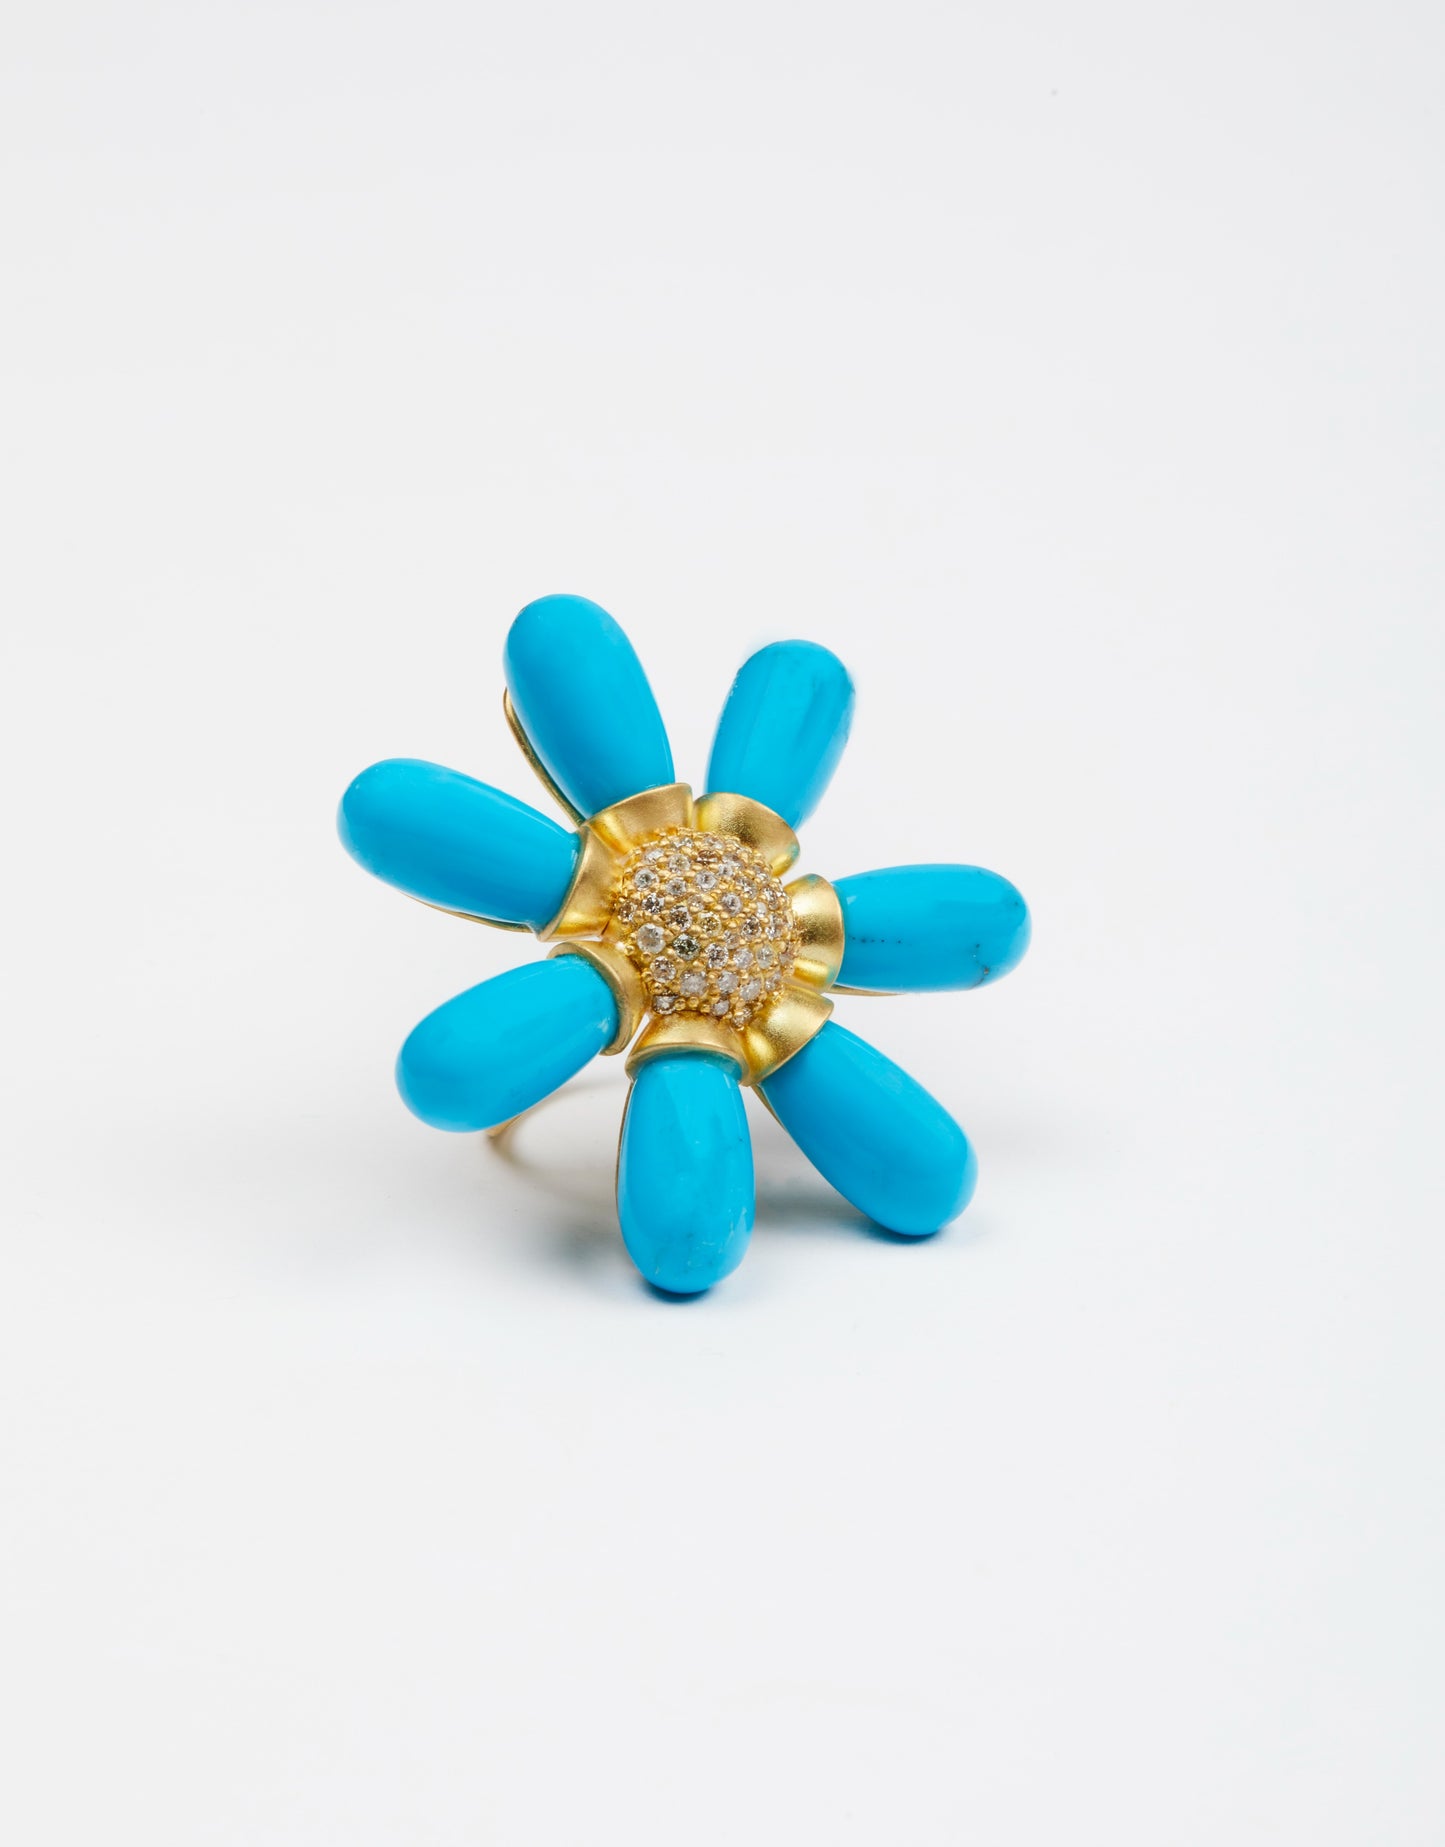 Turquoise Flower with Diamonds